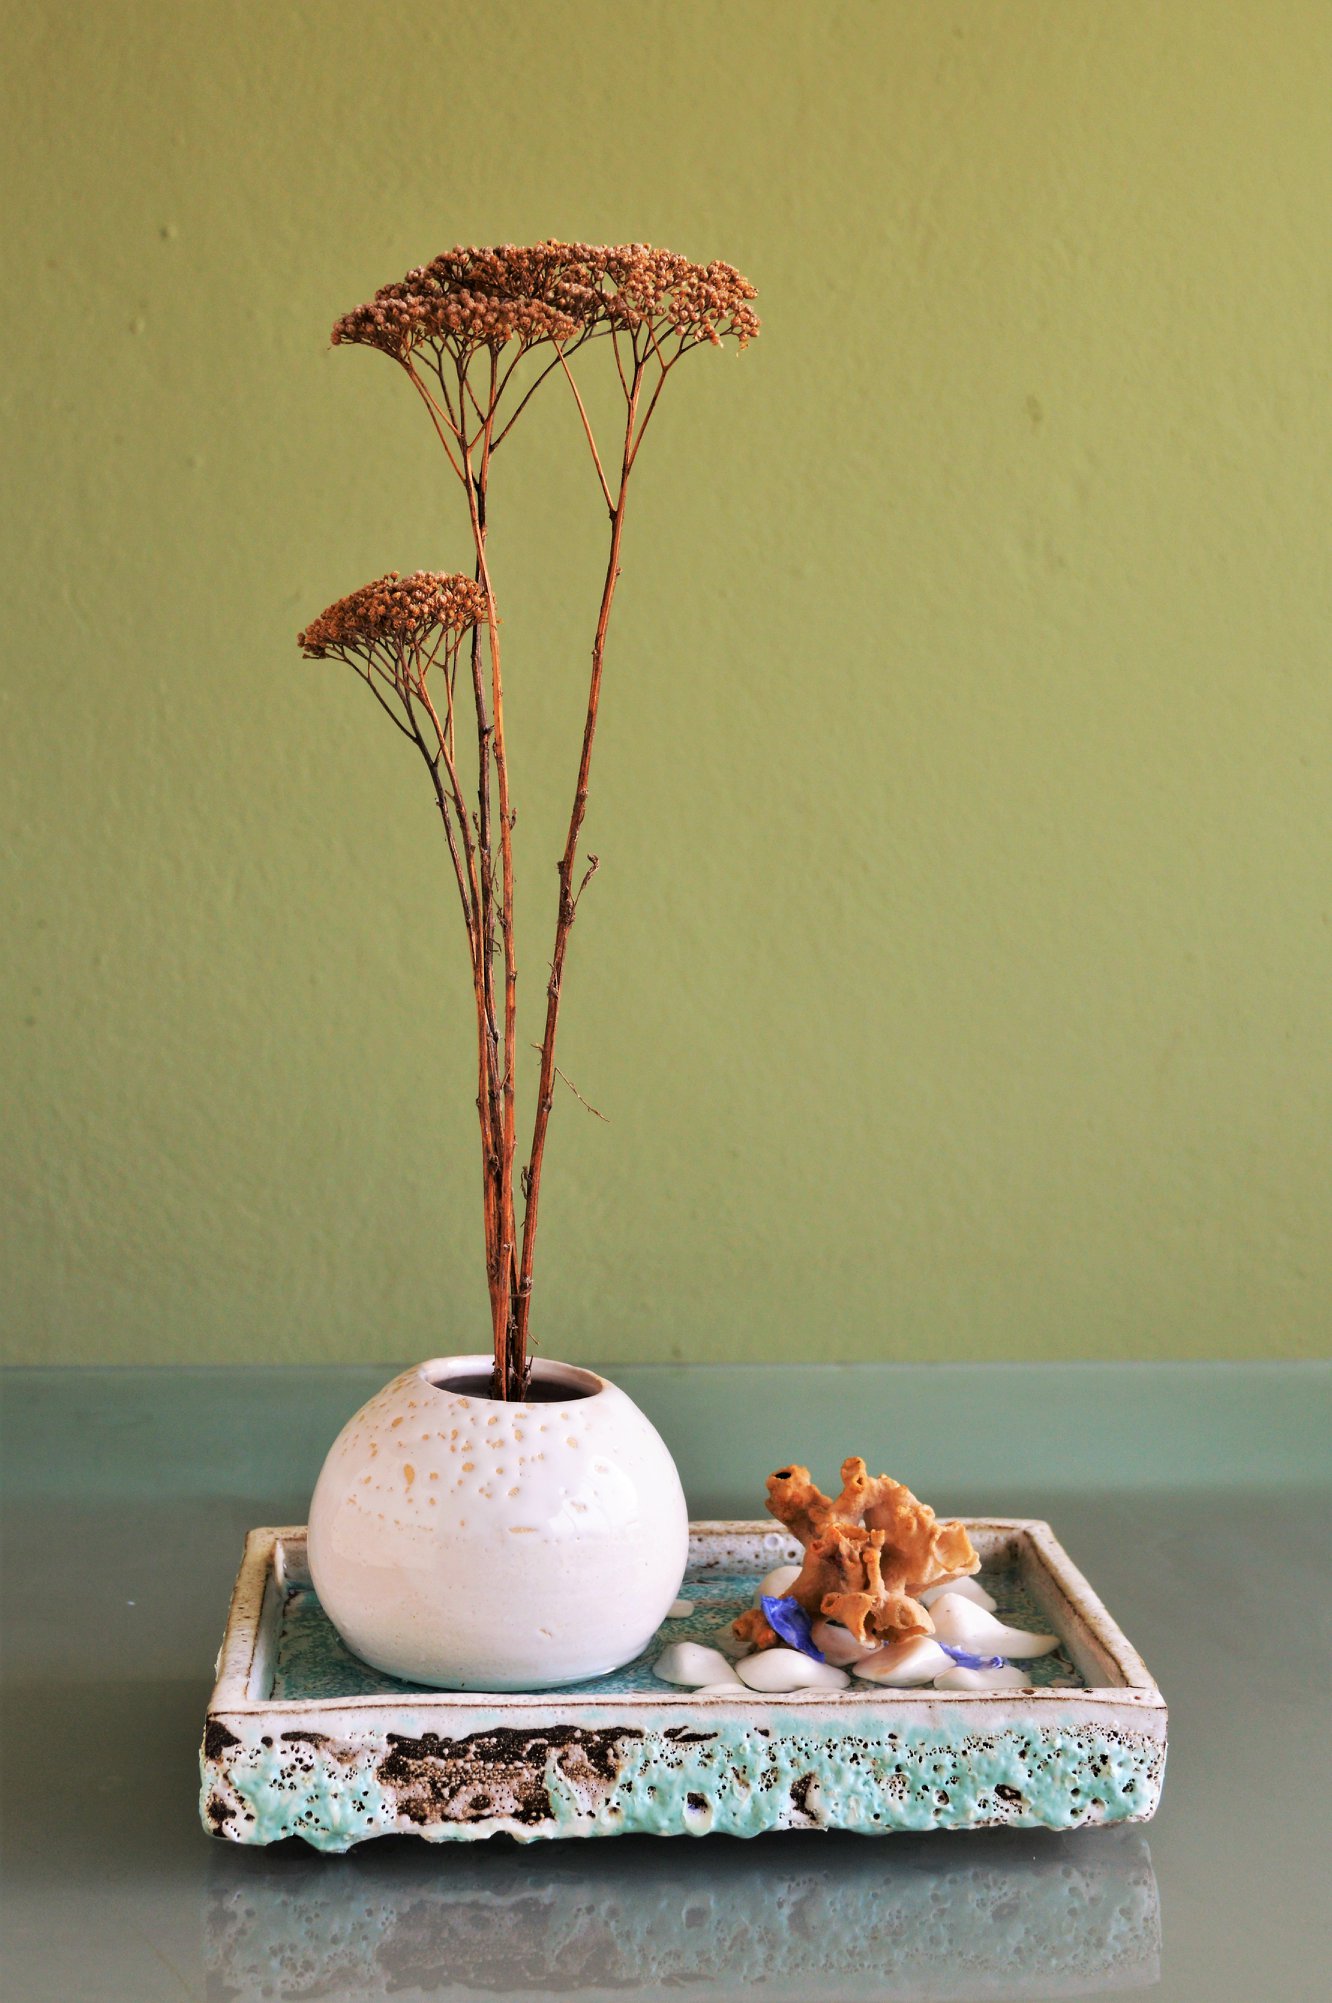 dried flowers in a white round ceramic bowl placed inside a green rectangle ceramic bowl